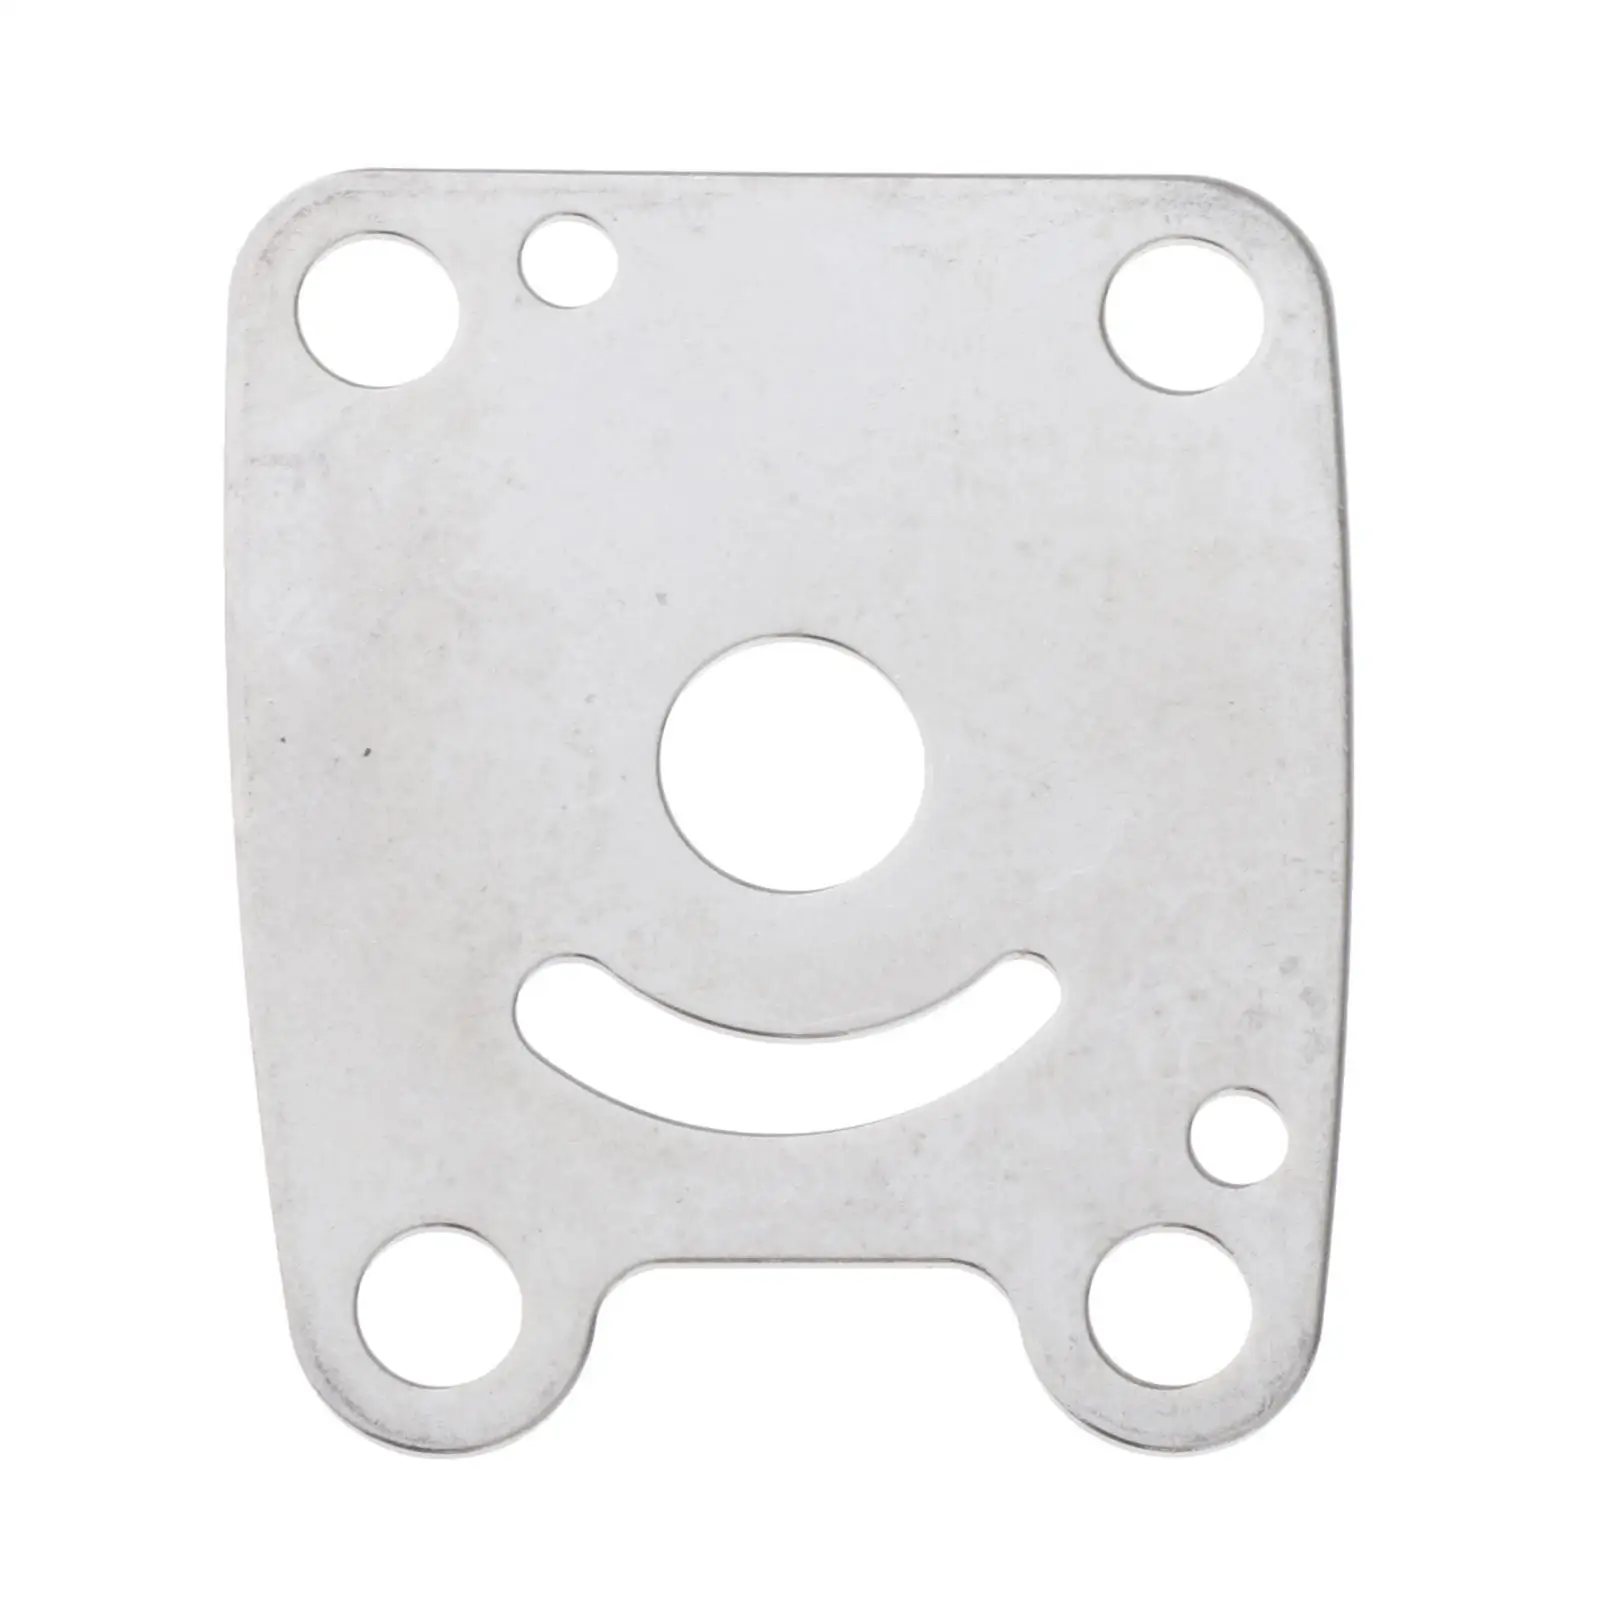 Outboard Water Pump Wear Plate 6E0-44323-00 Replace Impeller Guide Plate for Yamaha 2 4 Stroke 5HP 6HP Outboard Motors